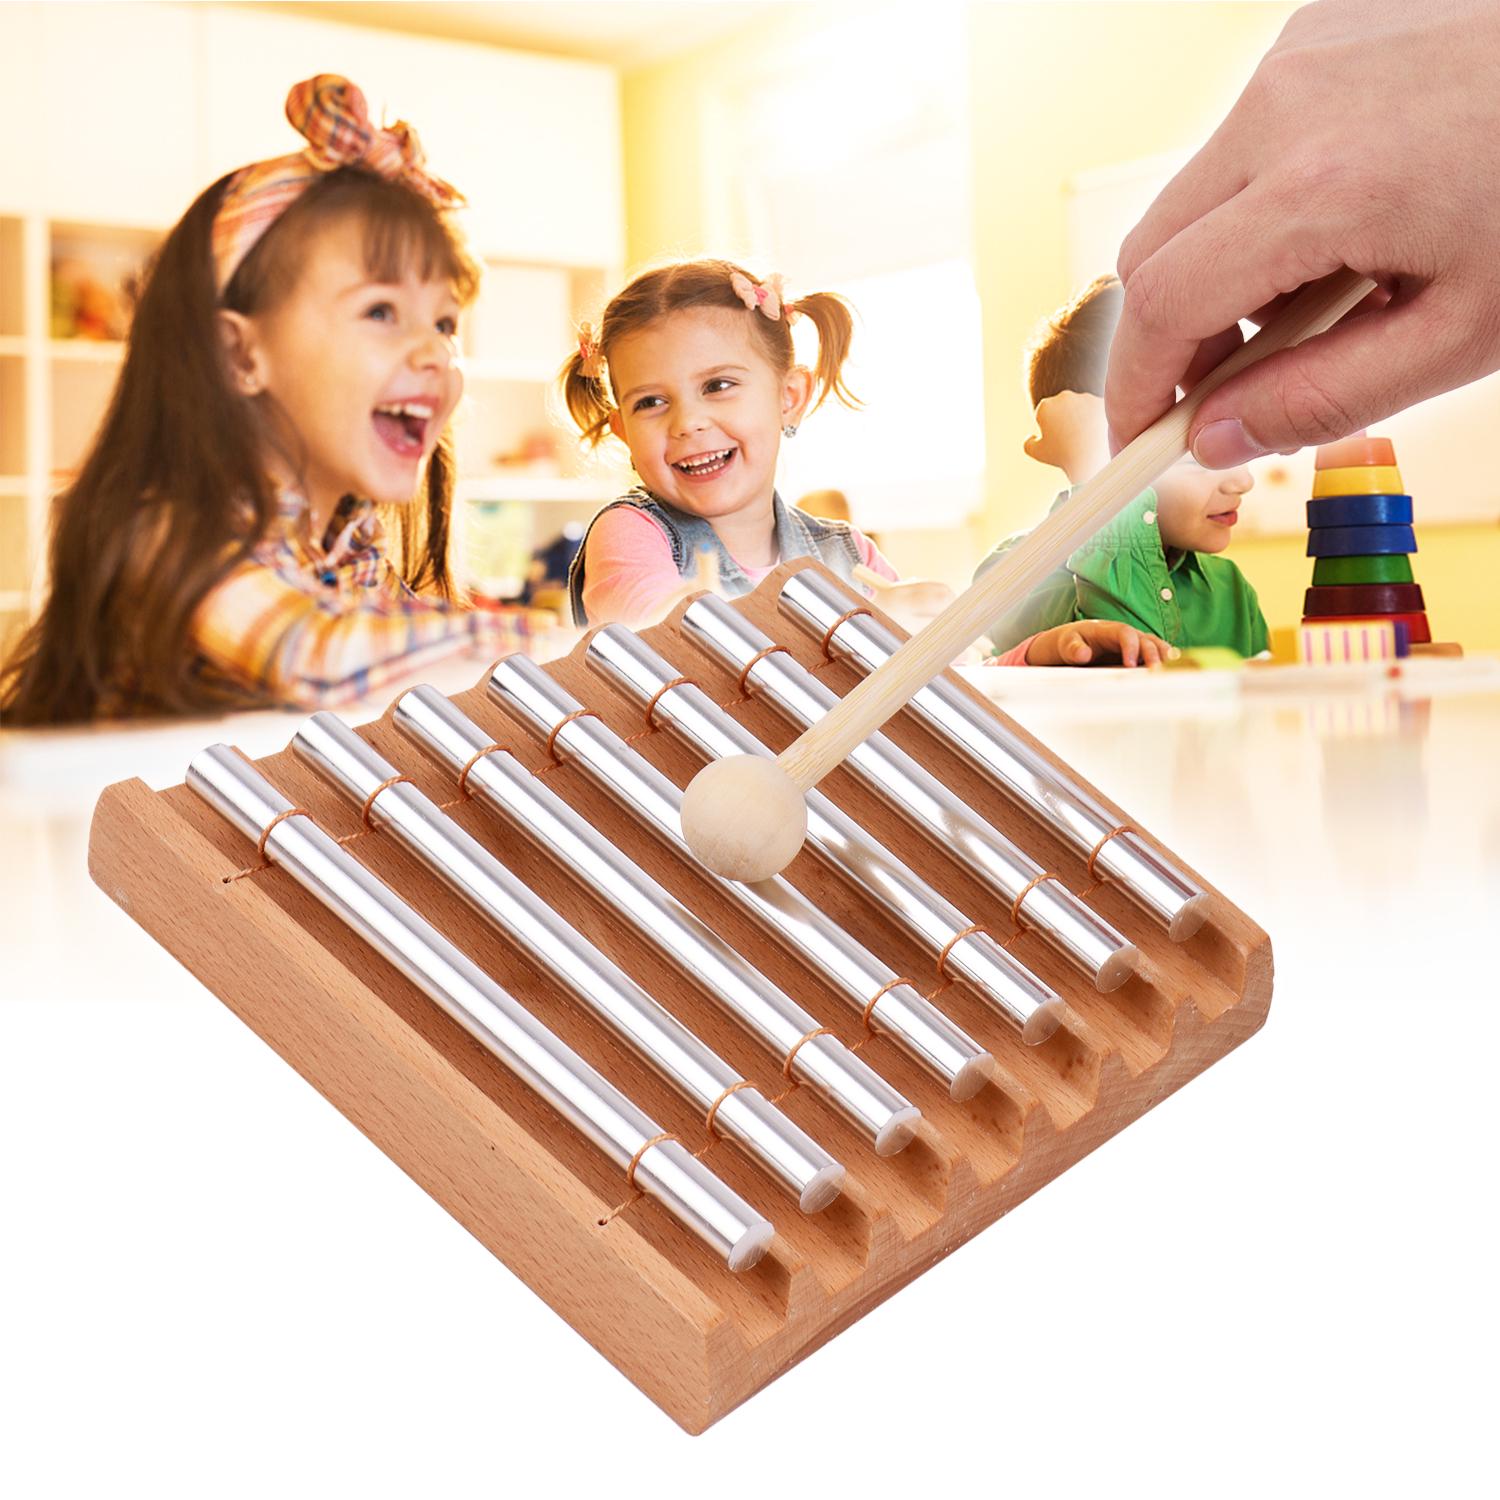 TOMTOP JMS Tone Wooden Chimes with Mallet Percussion Instrument for Prayer Yoga Meditation Musical Chime Toy for Children Teachers" Classroom Reminder Bell